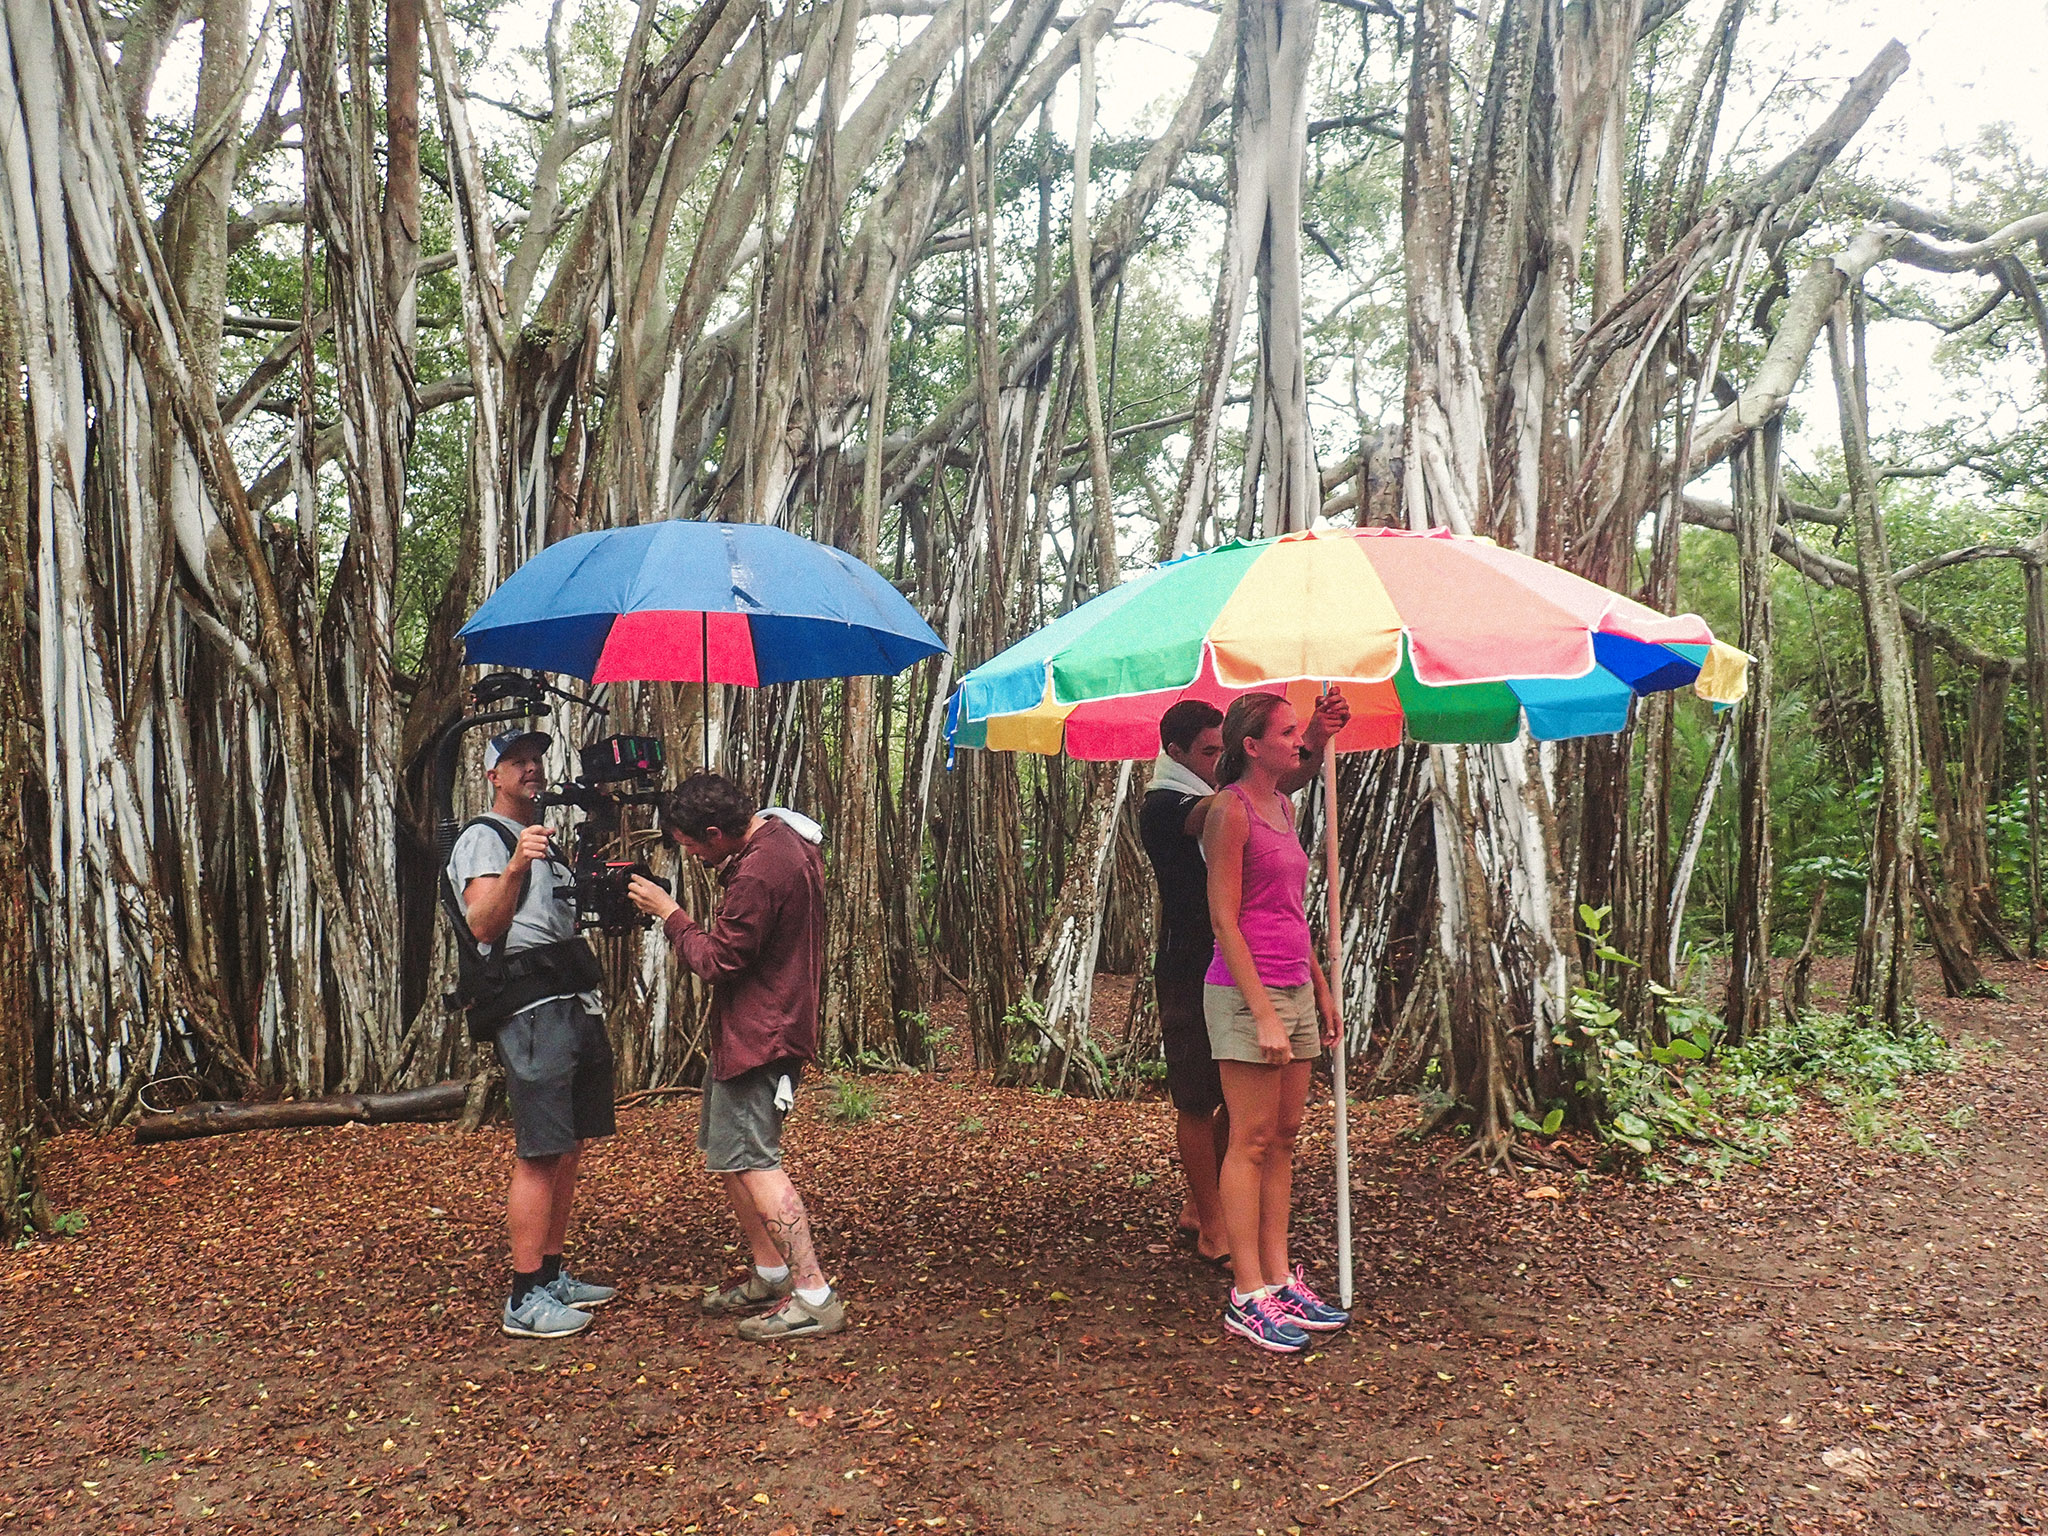  Behind the scenes photo for Turtle Bay Resort highlighting the various activities available through the resort 